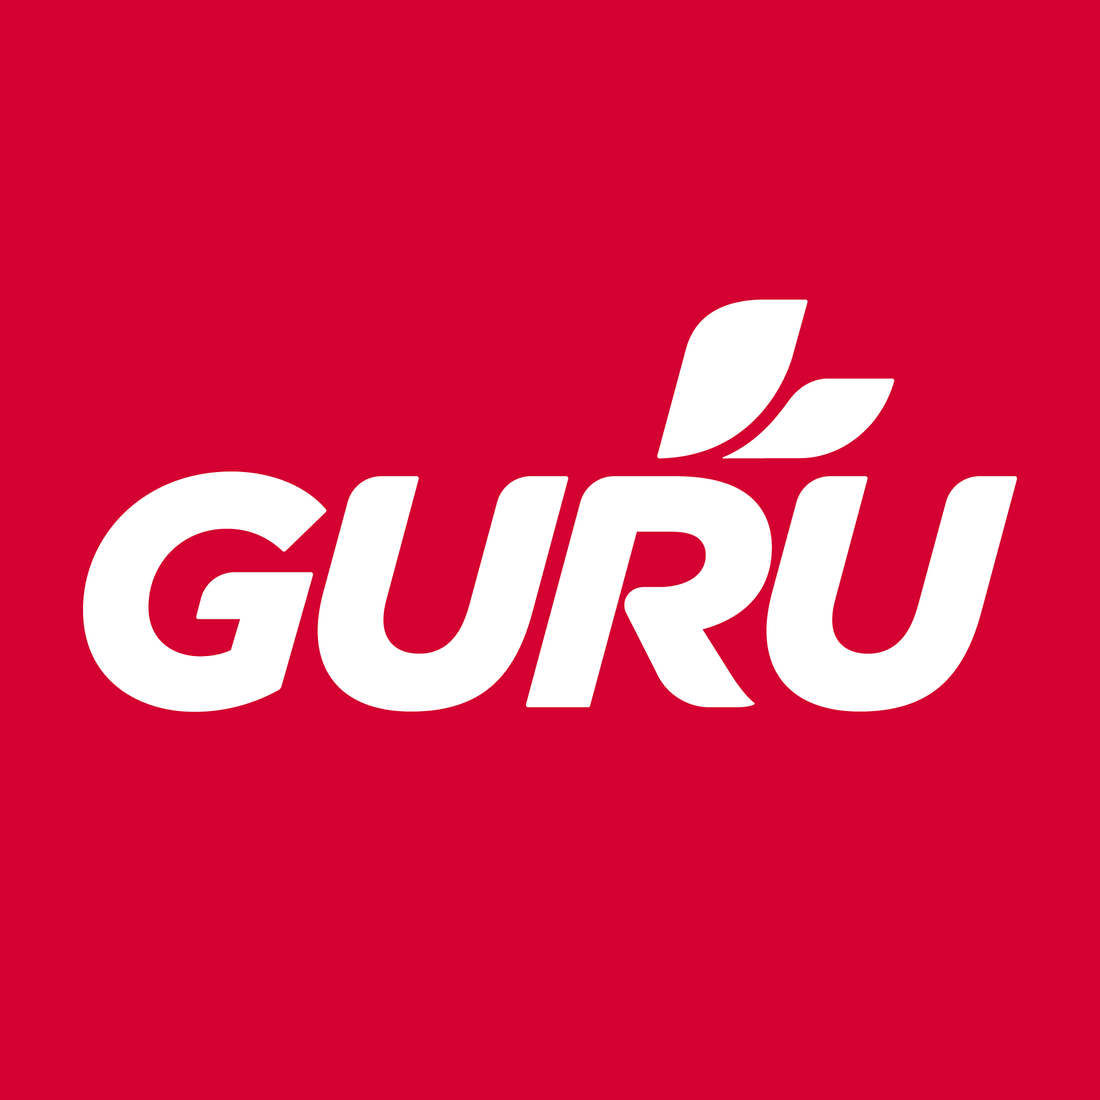 GURU Organic Energy to Report First Quarter 2022 Results and to Host Virtual Annual Meeting